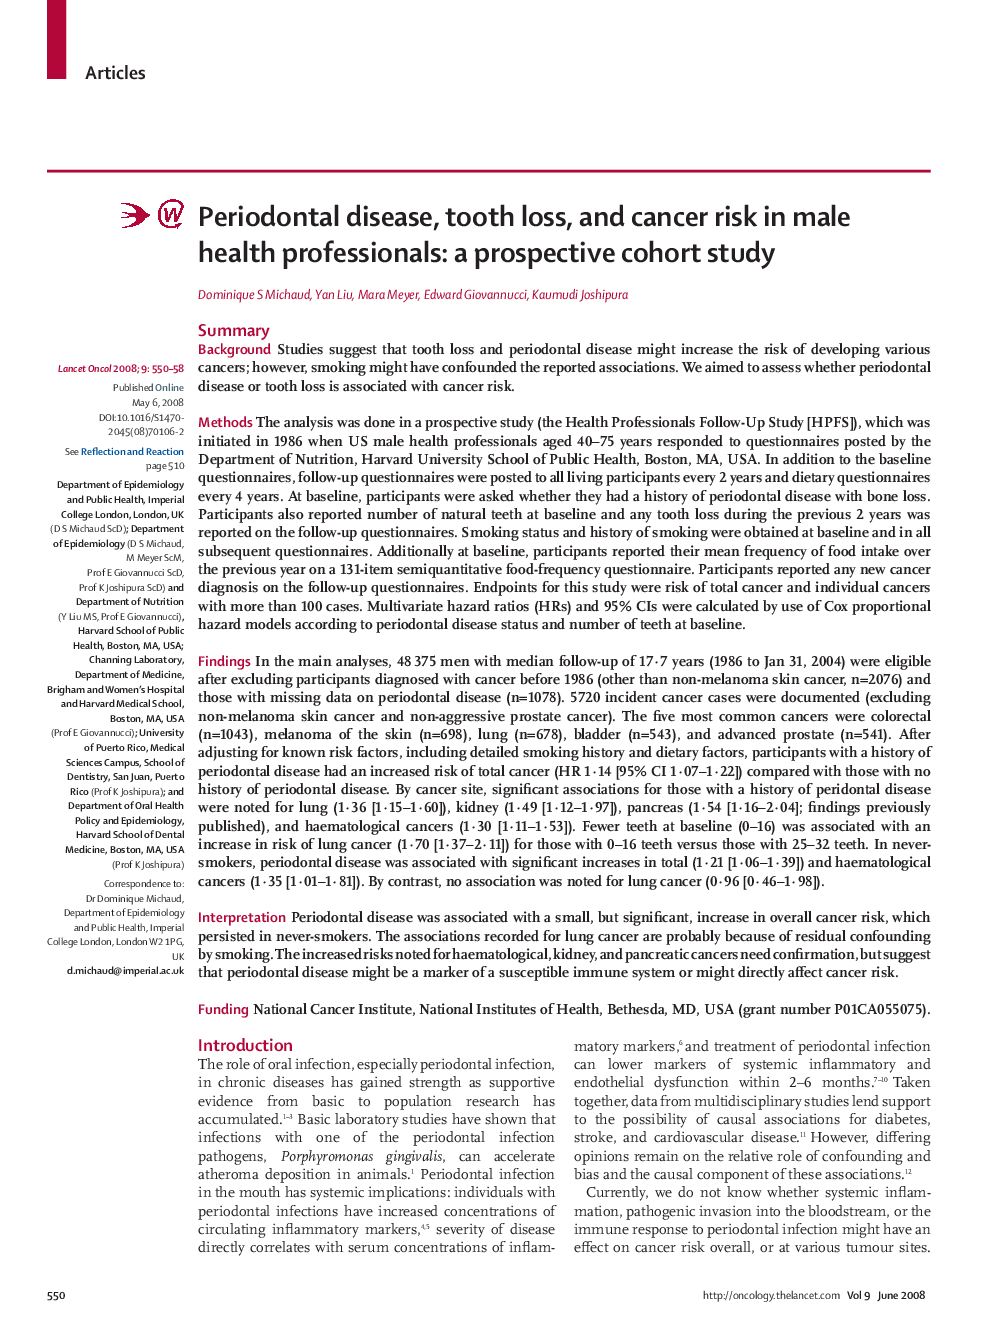 Periodontal disease, tooth loss, and cancer risk in male health professionals: a prospective cohort study